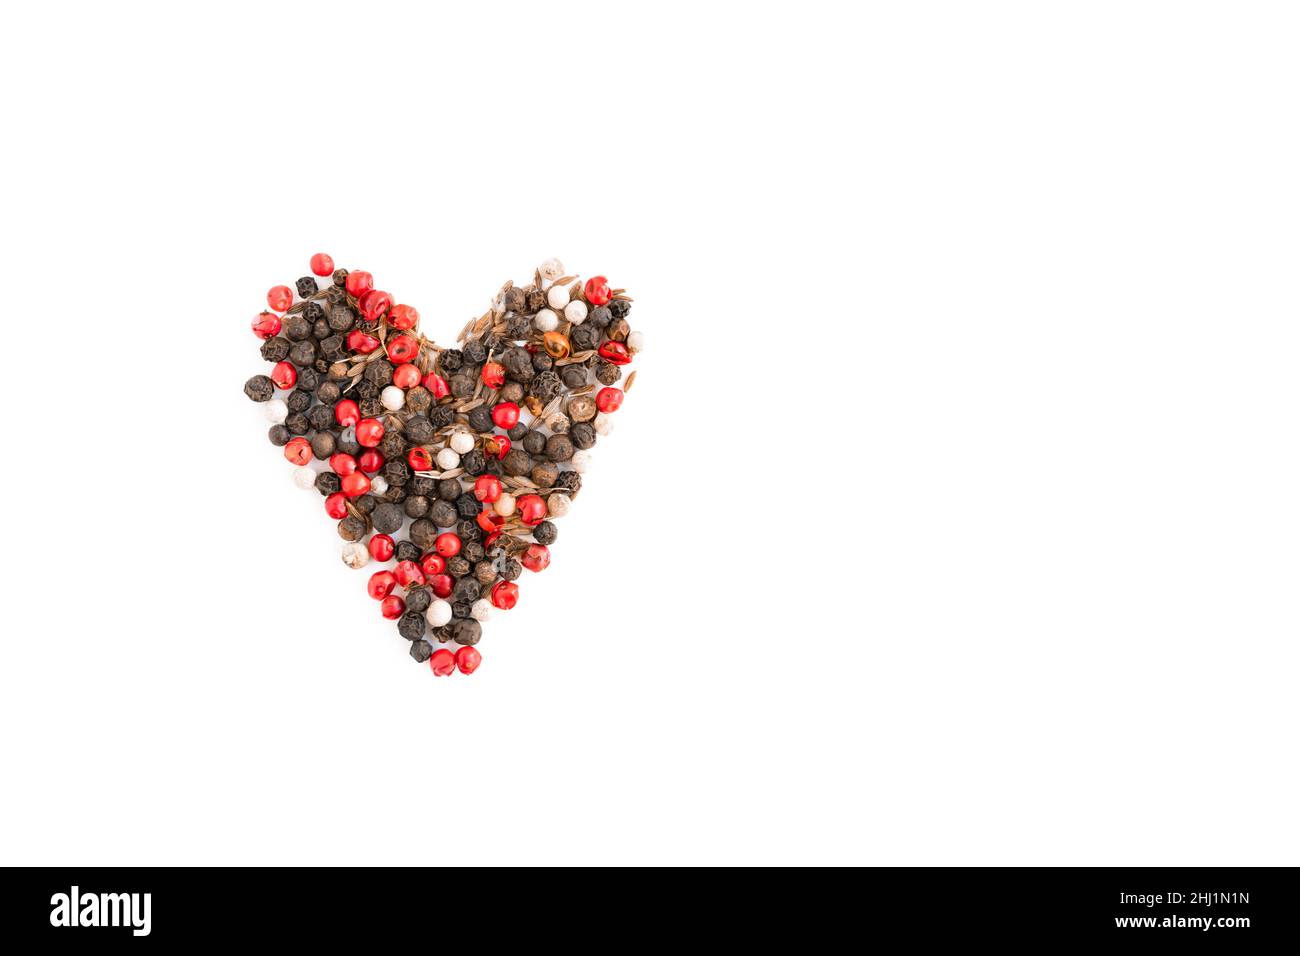 Cumin, pink pepper and heart-shaped black pepper on white background, isolated spices Stock Photo